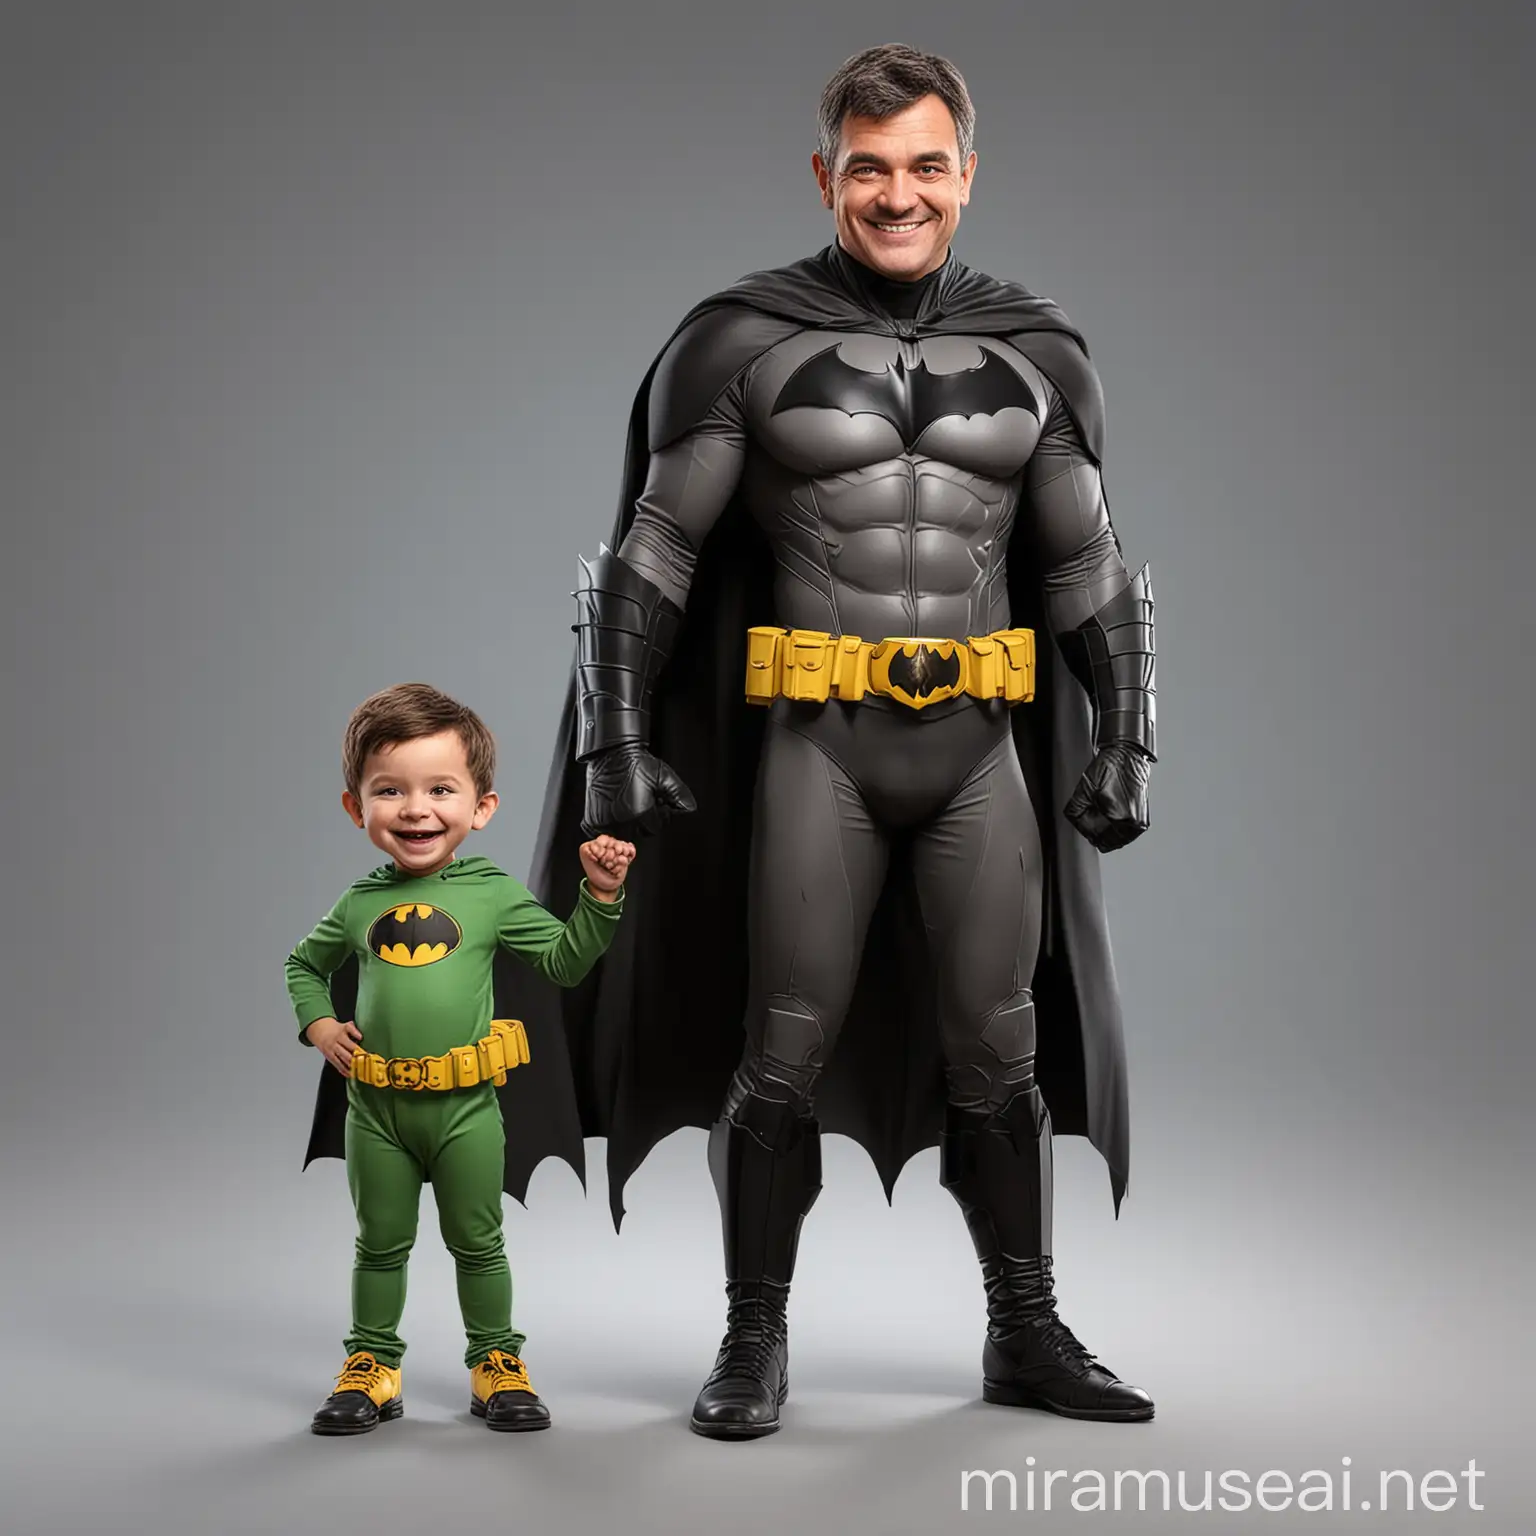 Realistic 4D Caricature Adult Man as Batman and Child as Robin Smiling in Full Body Costumes